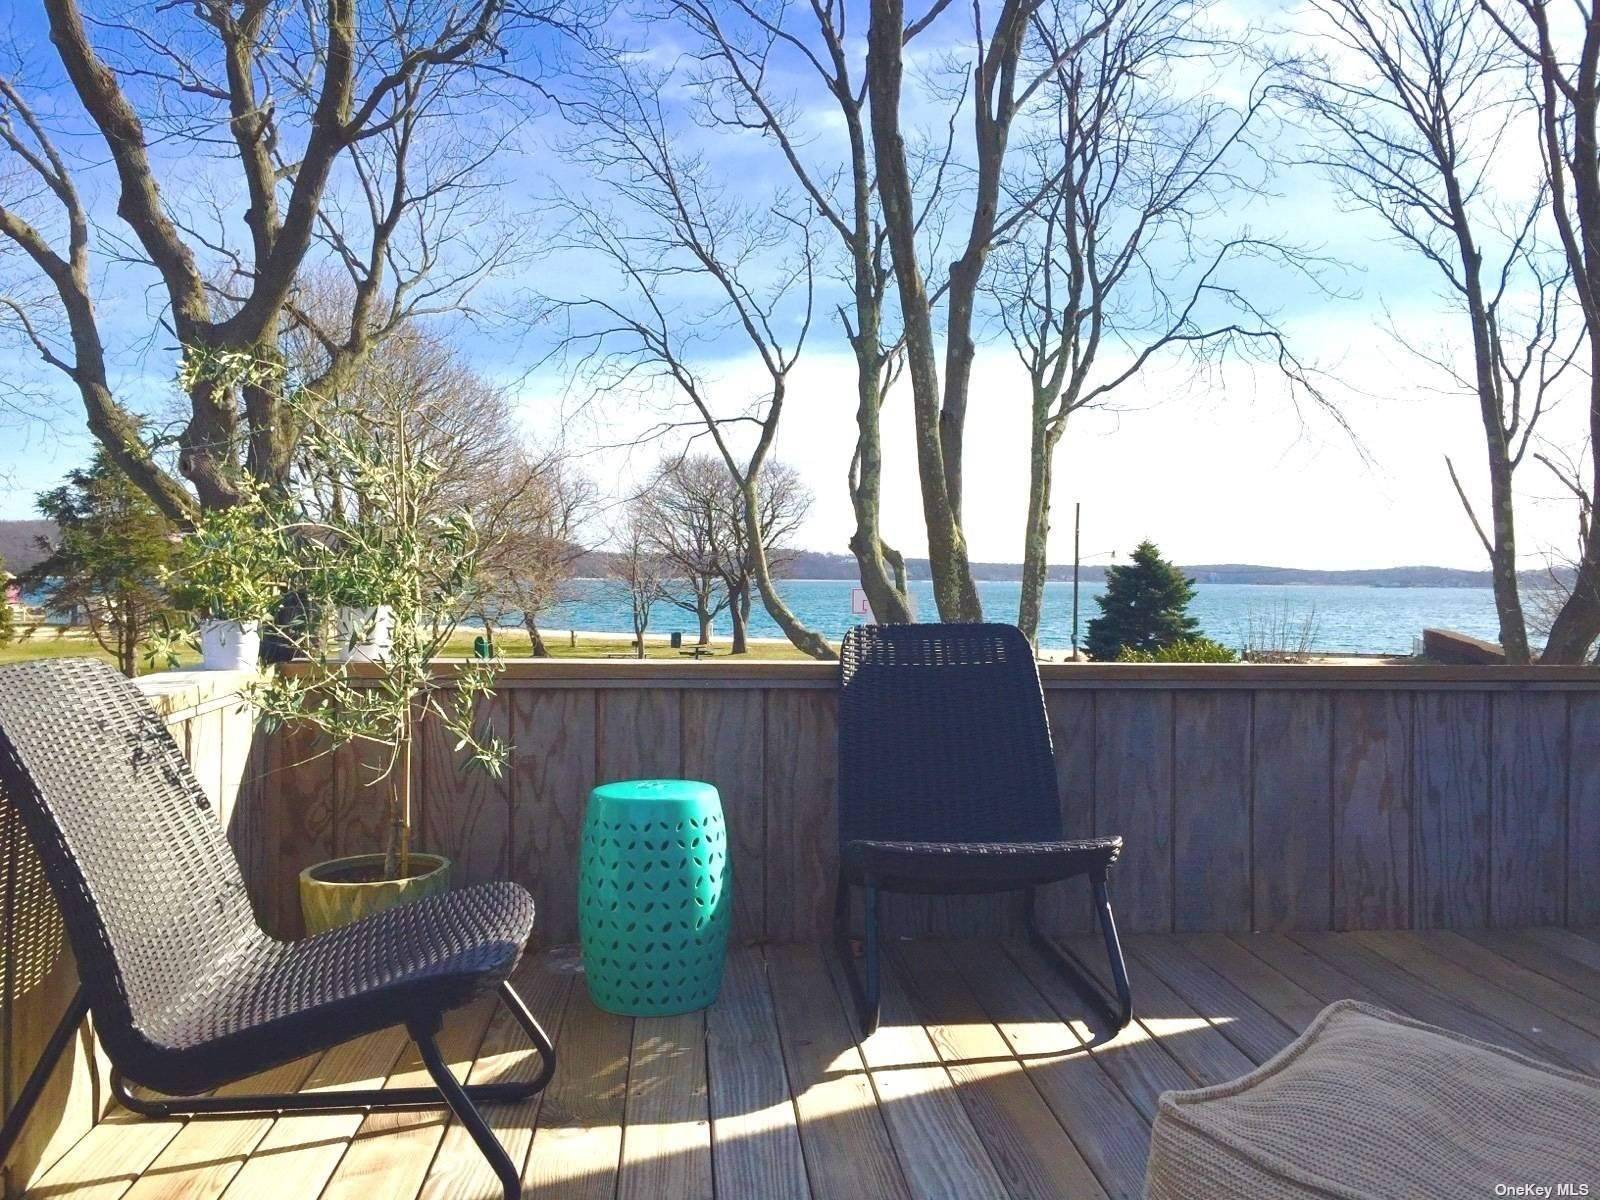 Greenport village 5 bedrooms, 2 baths with sweeping Water Views, adjacent to 6th St bay beach amp ; park.